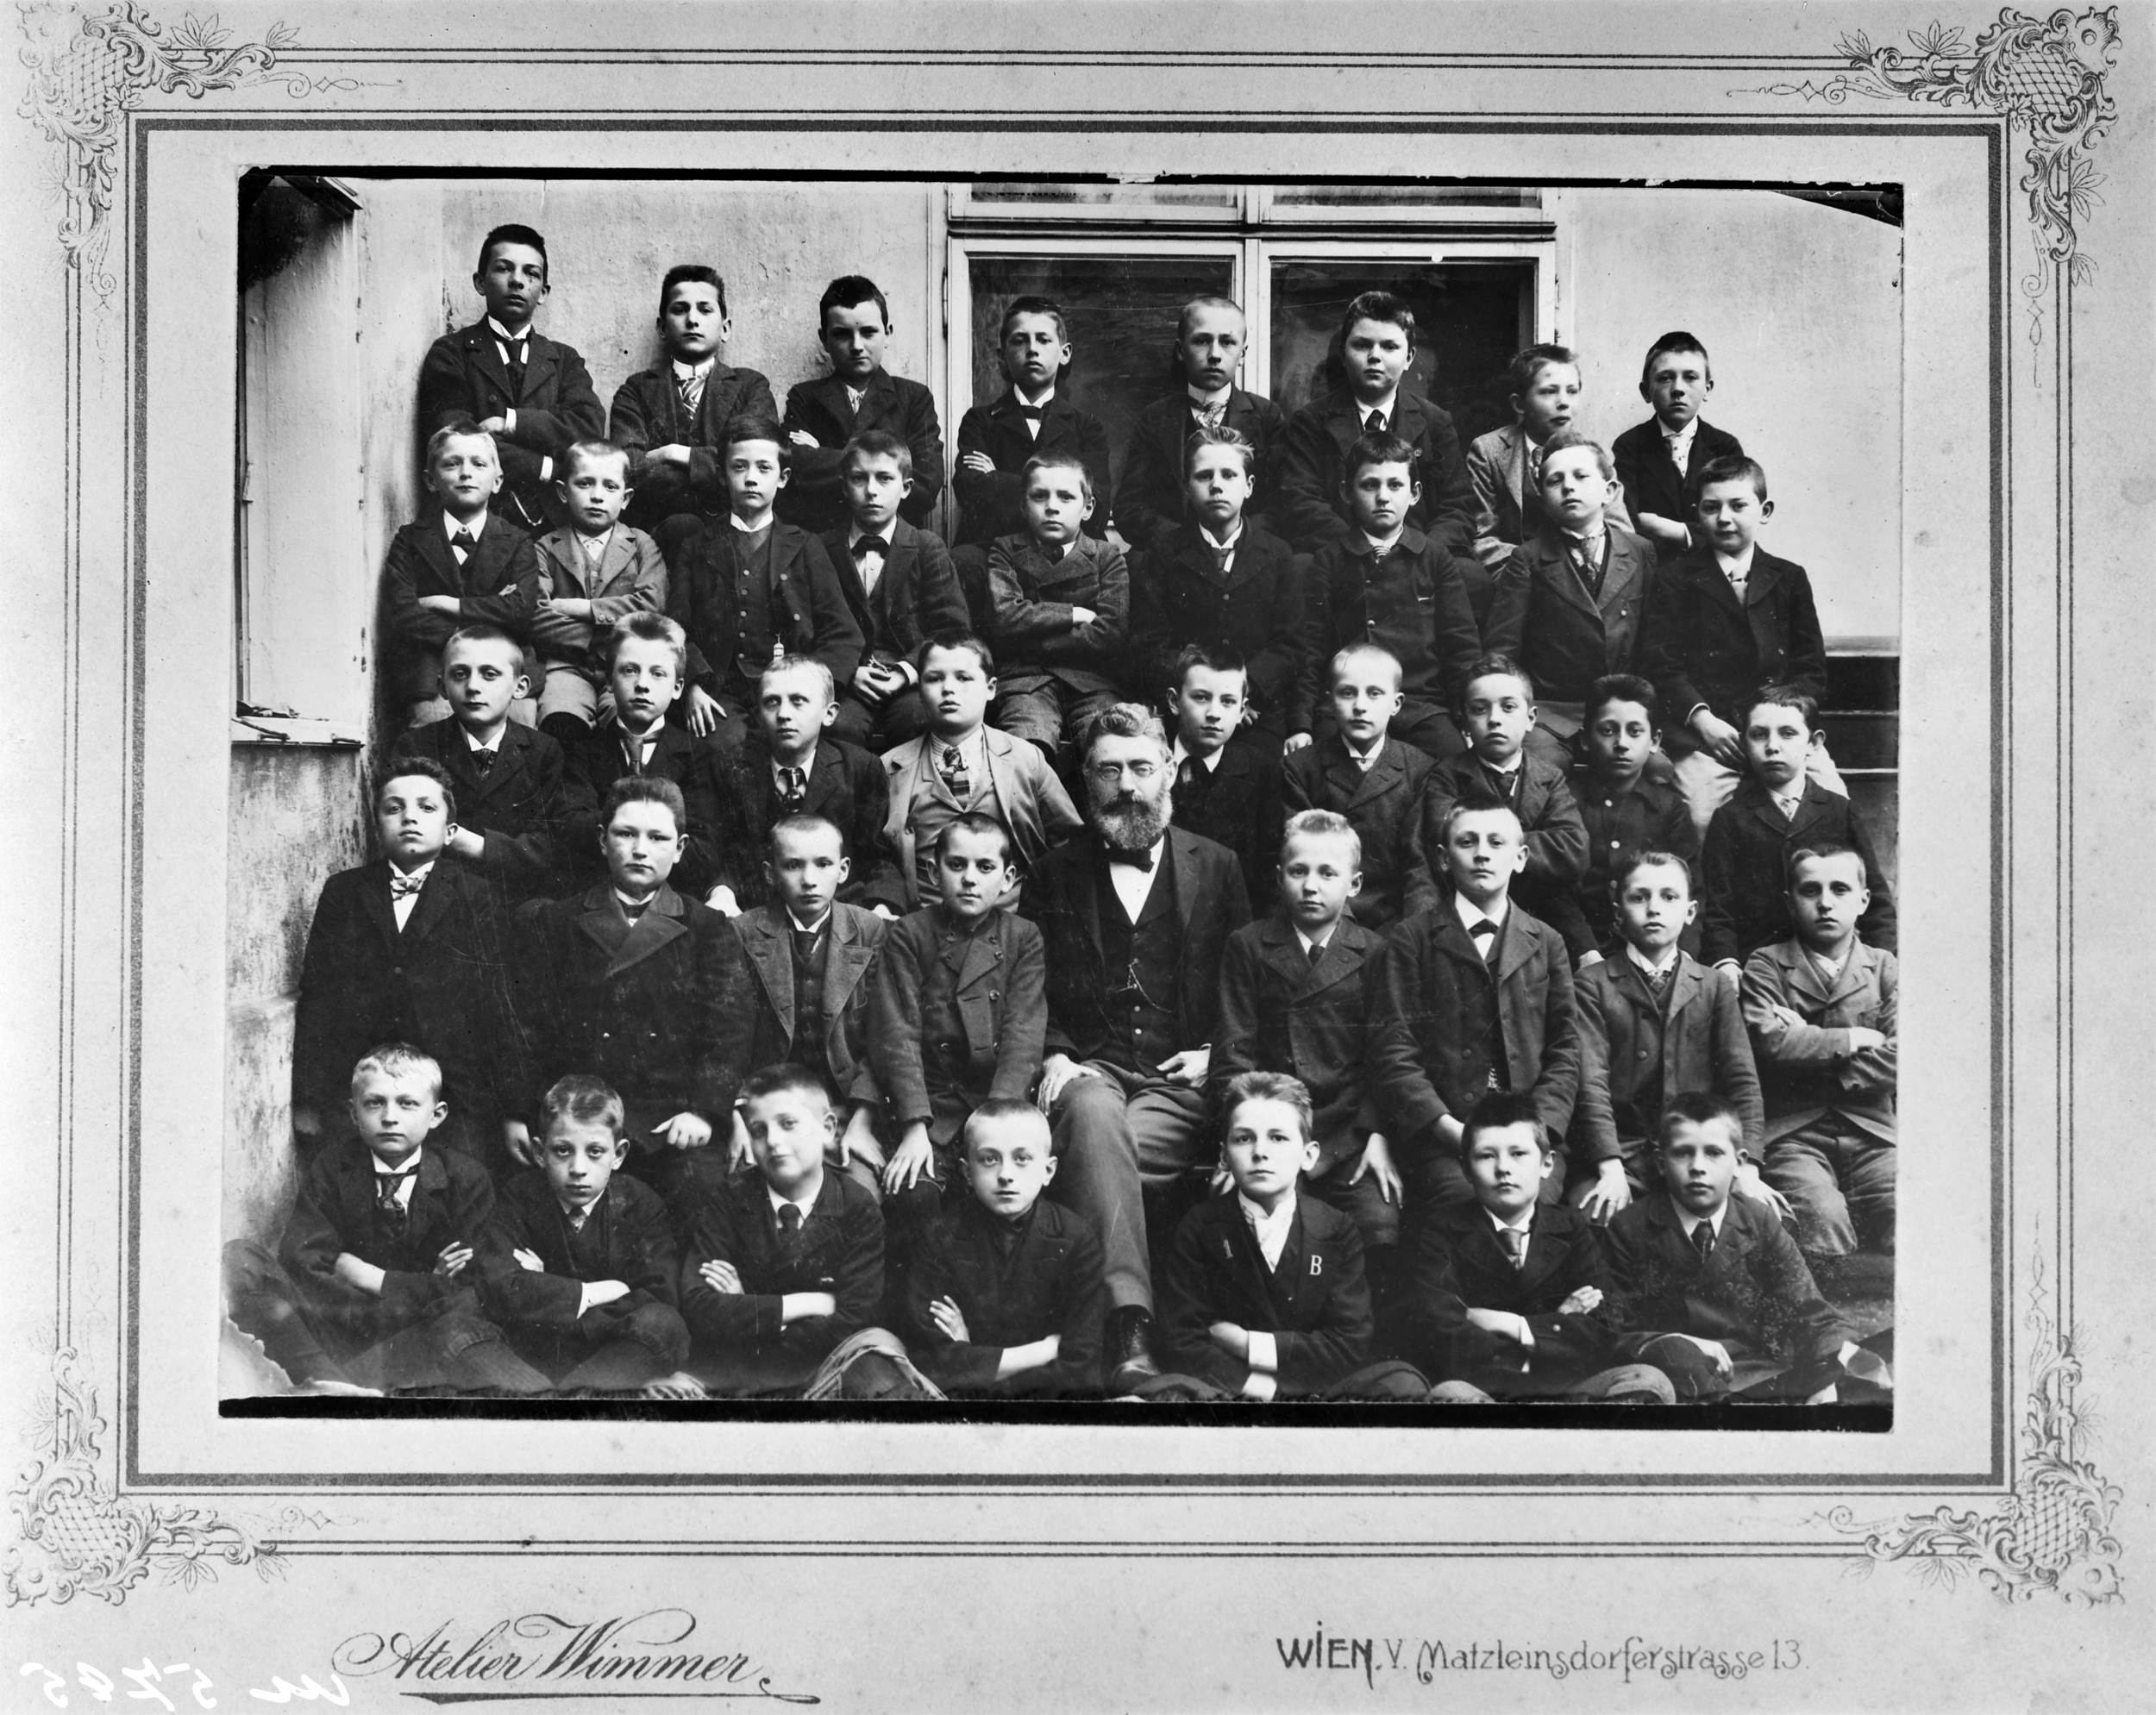 Adolf Hitler at the age of 13 (top right) as a student of the Realschule of Linz, in the middle is his schoolmaster Prof. Oskar Lauger